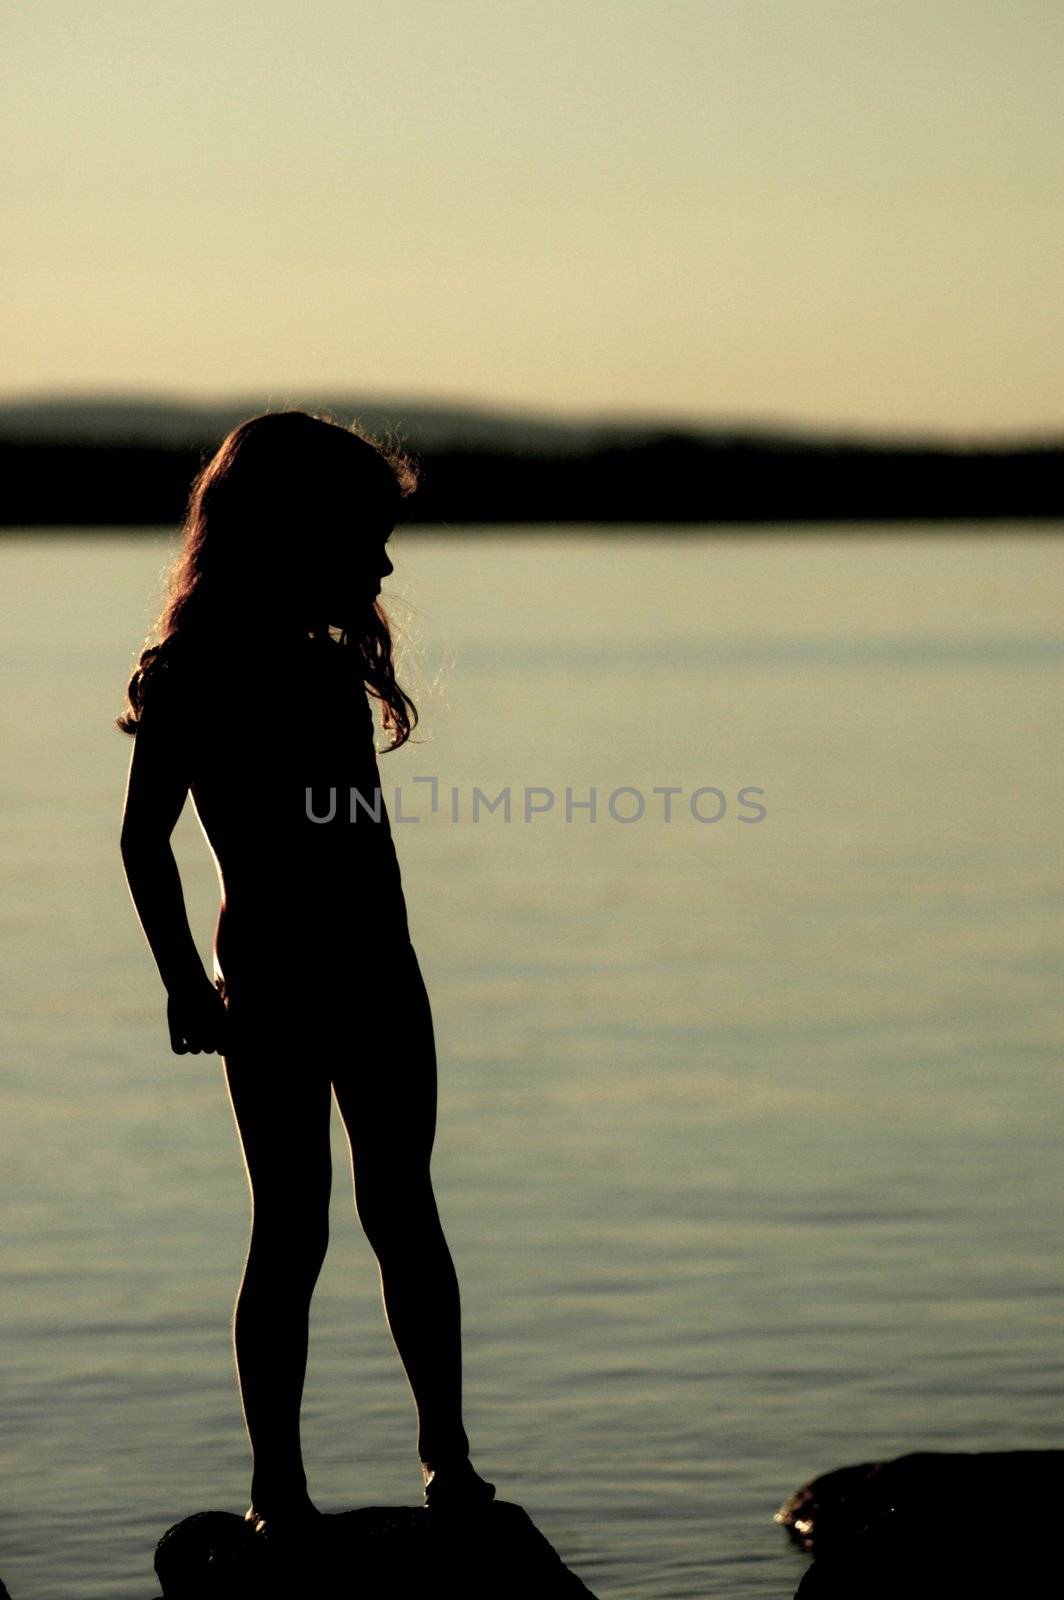 A young girl's silhouette by lake Millinocket in maine, with twilight behind her.